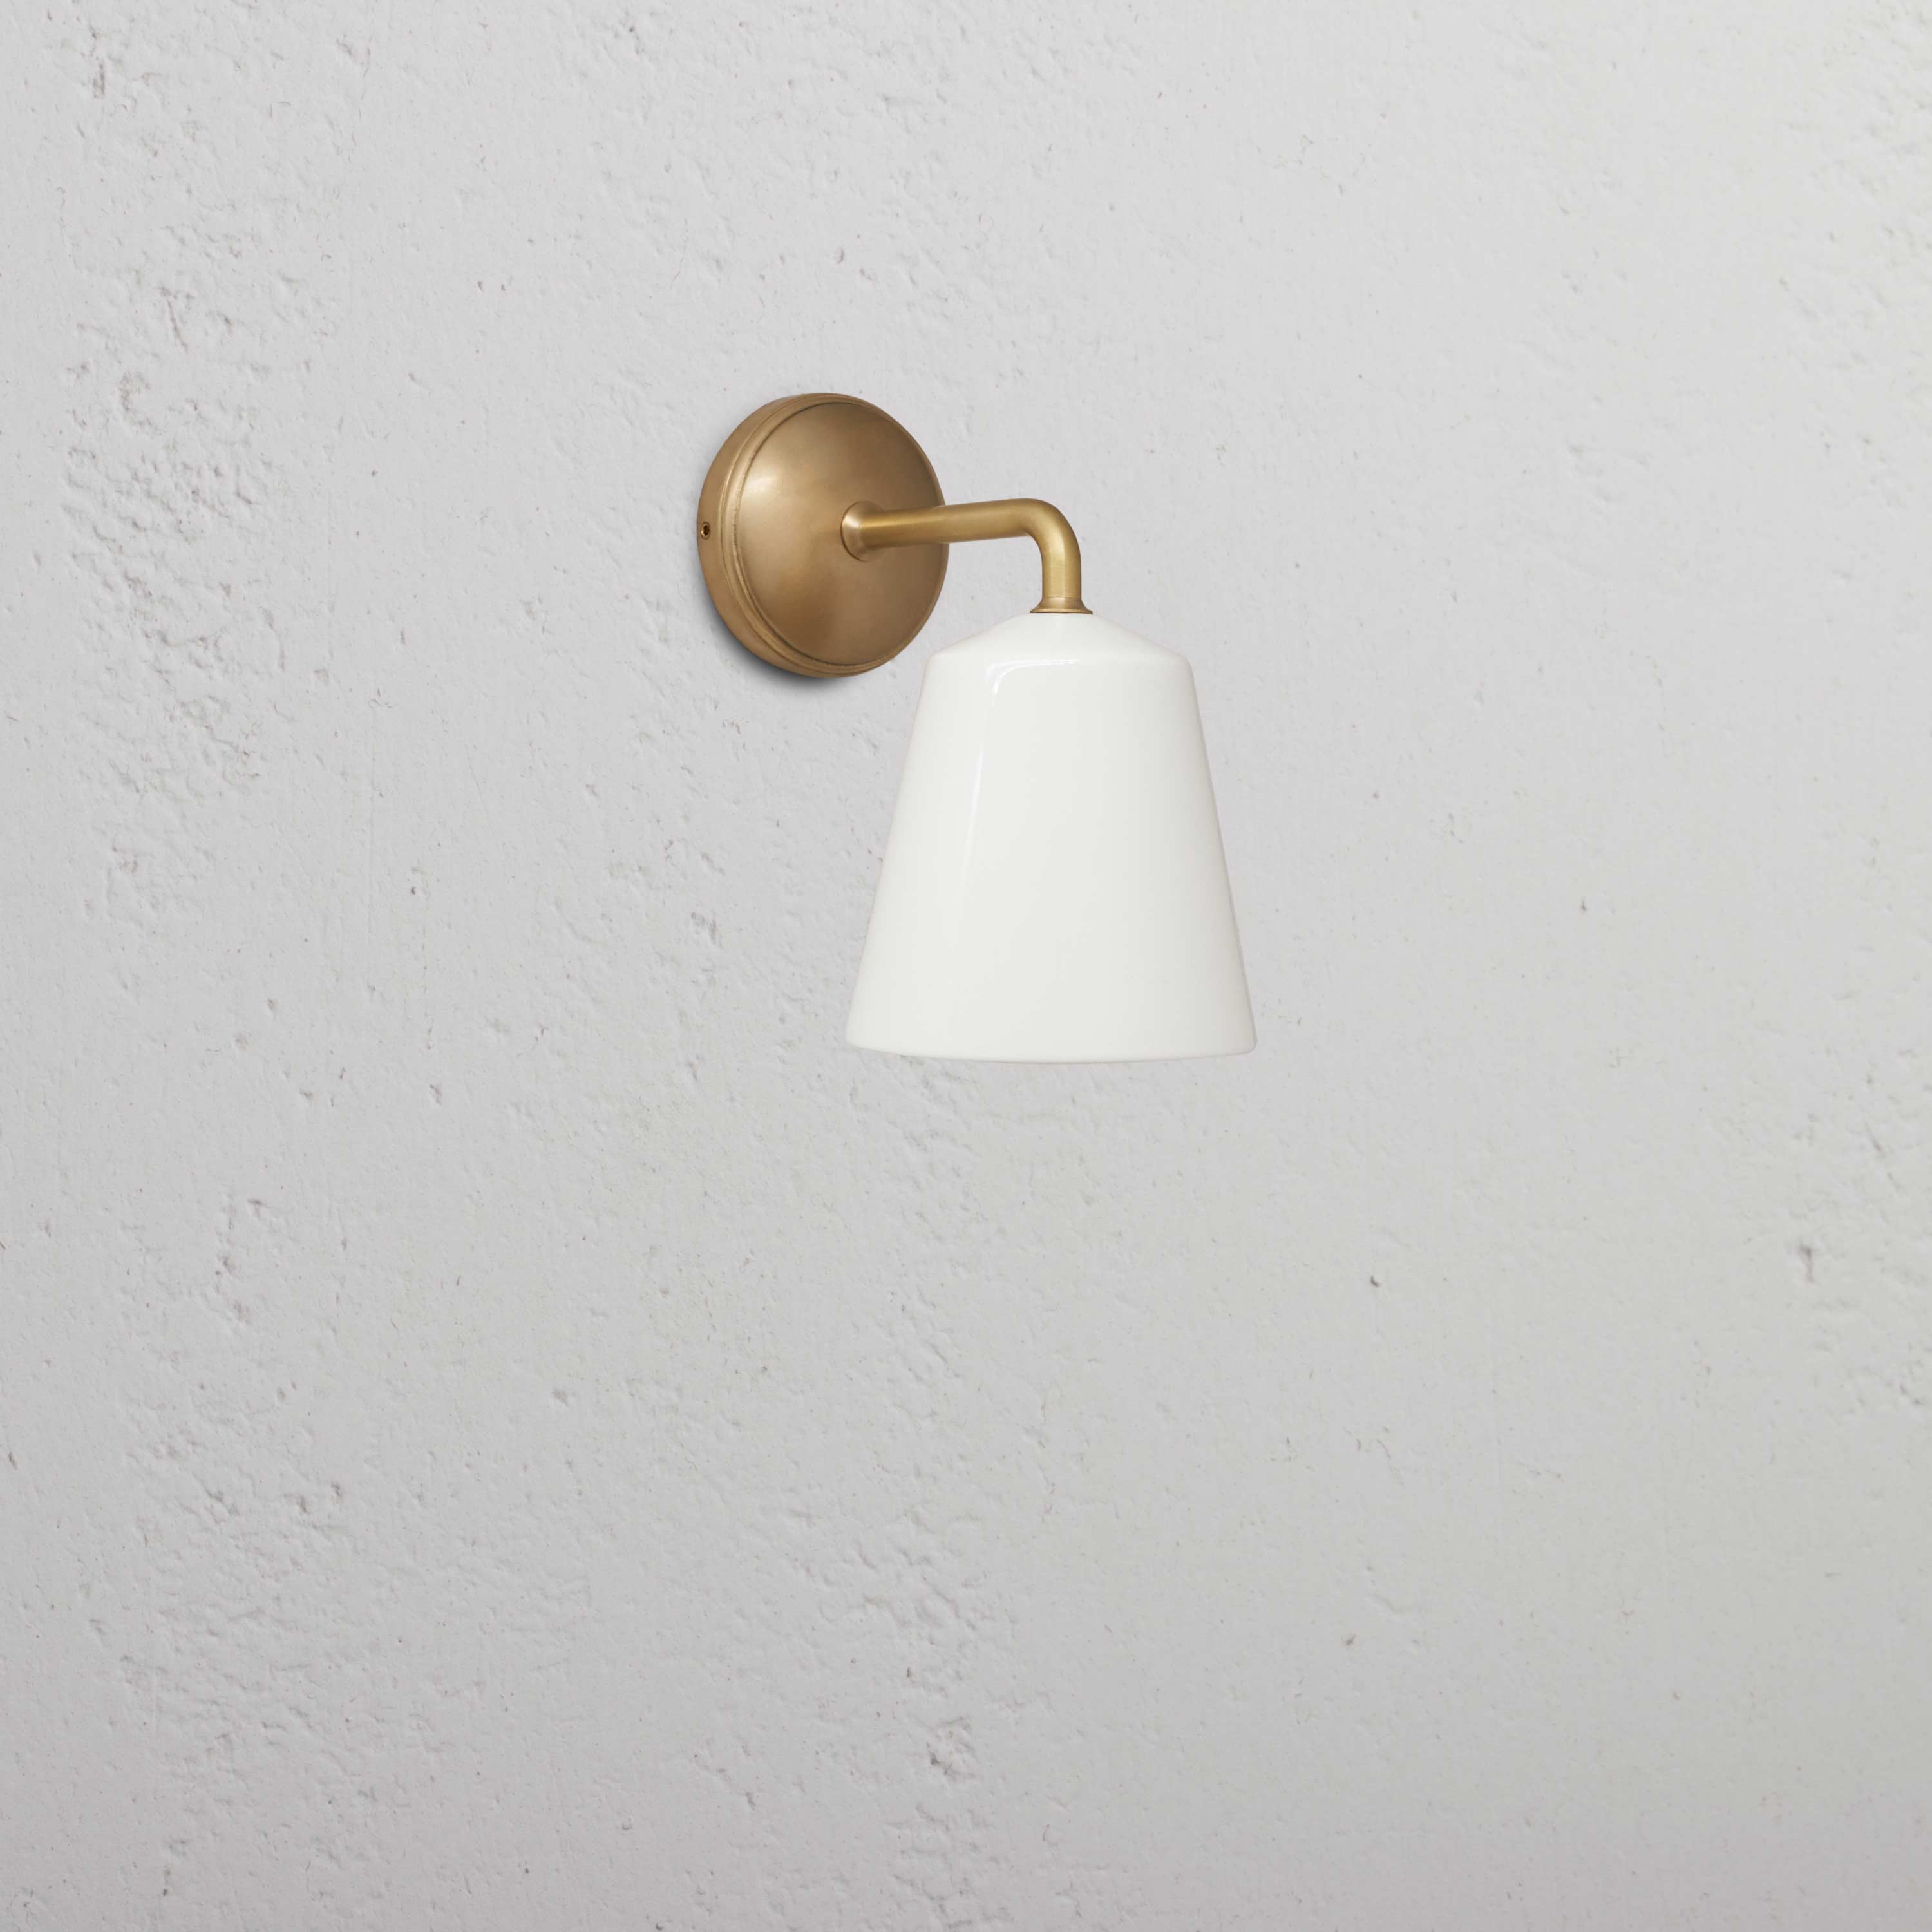 Wall Light Fine Porcelain - Antique Brass Installed on Wall In Luxury